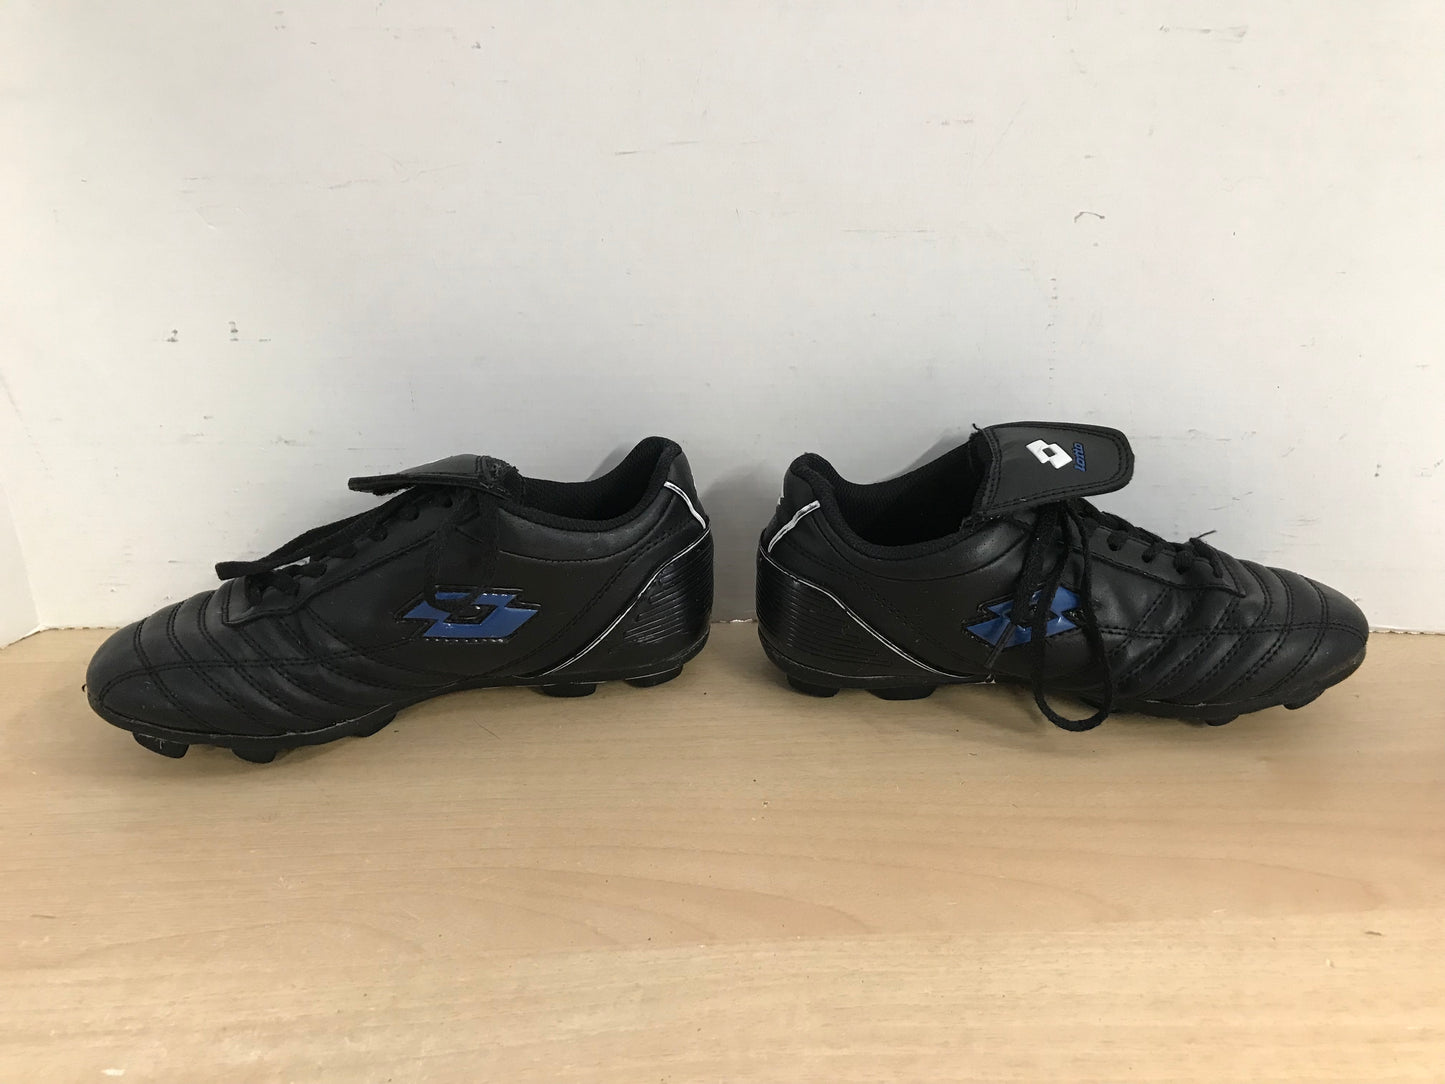 Soccer Shoes Cleats Child Size 2 Lotto Blue Black